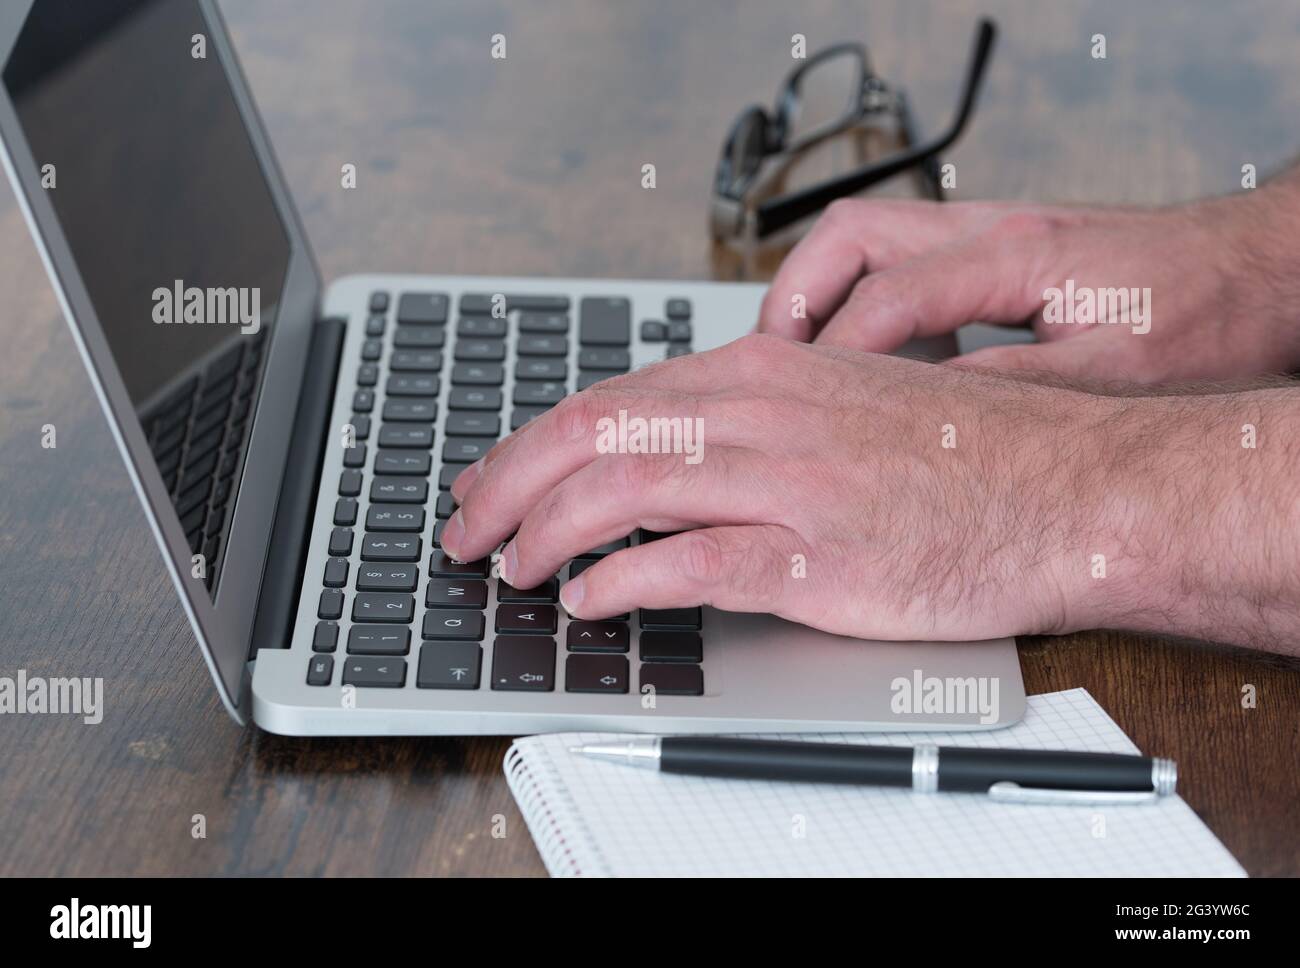 side view close-up of person working on laptop computer at wooden desk Stock Photo